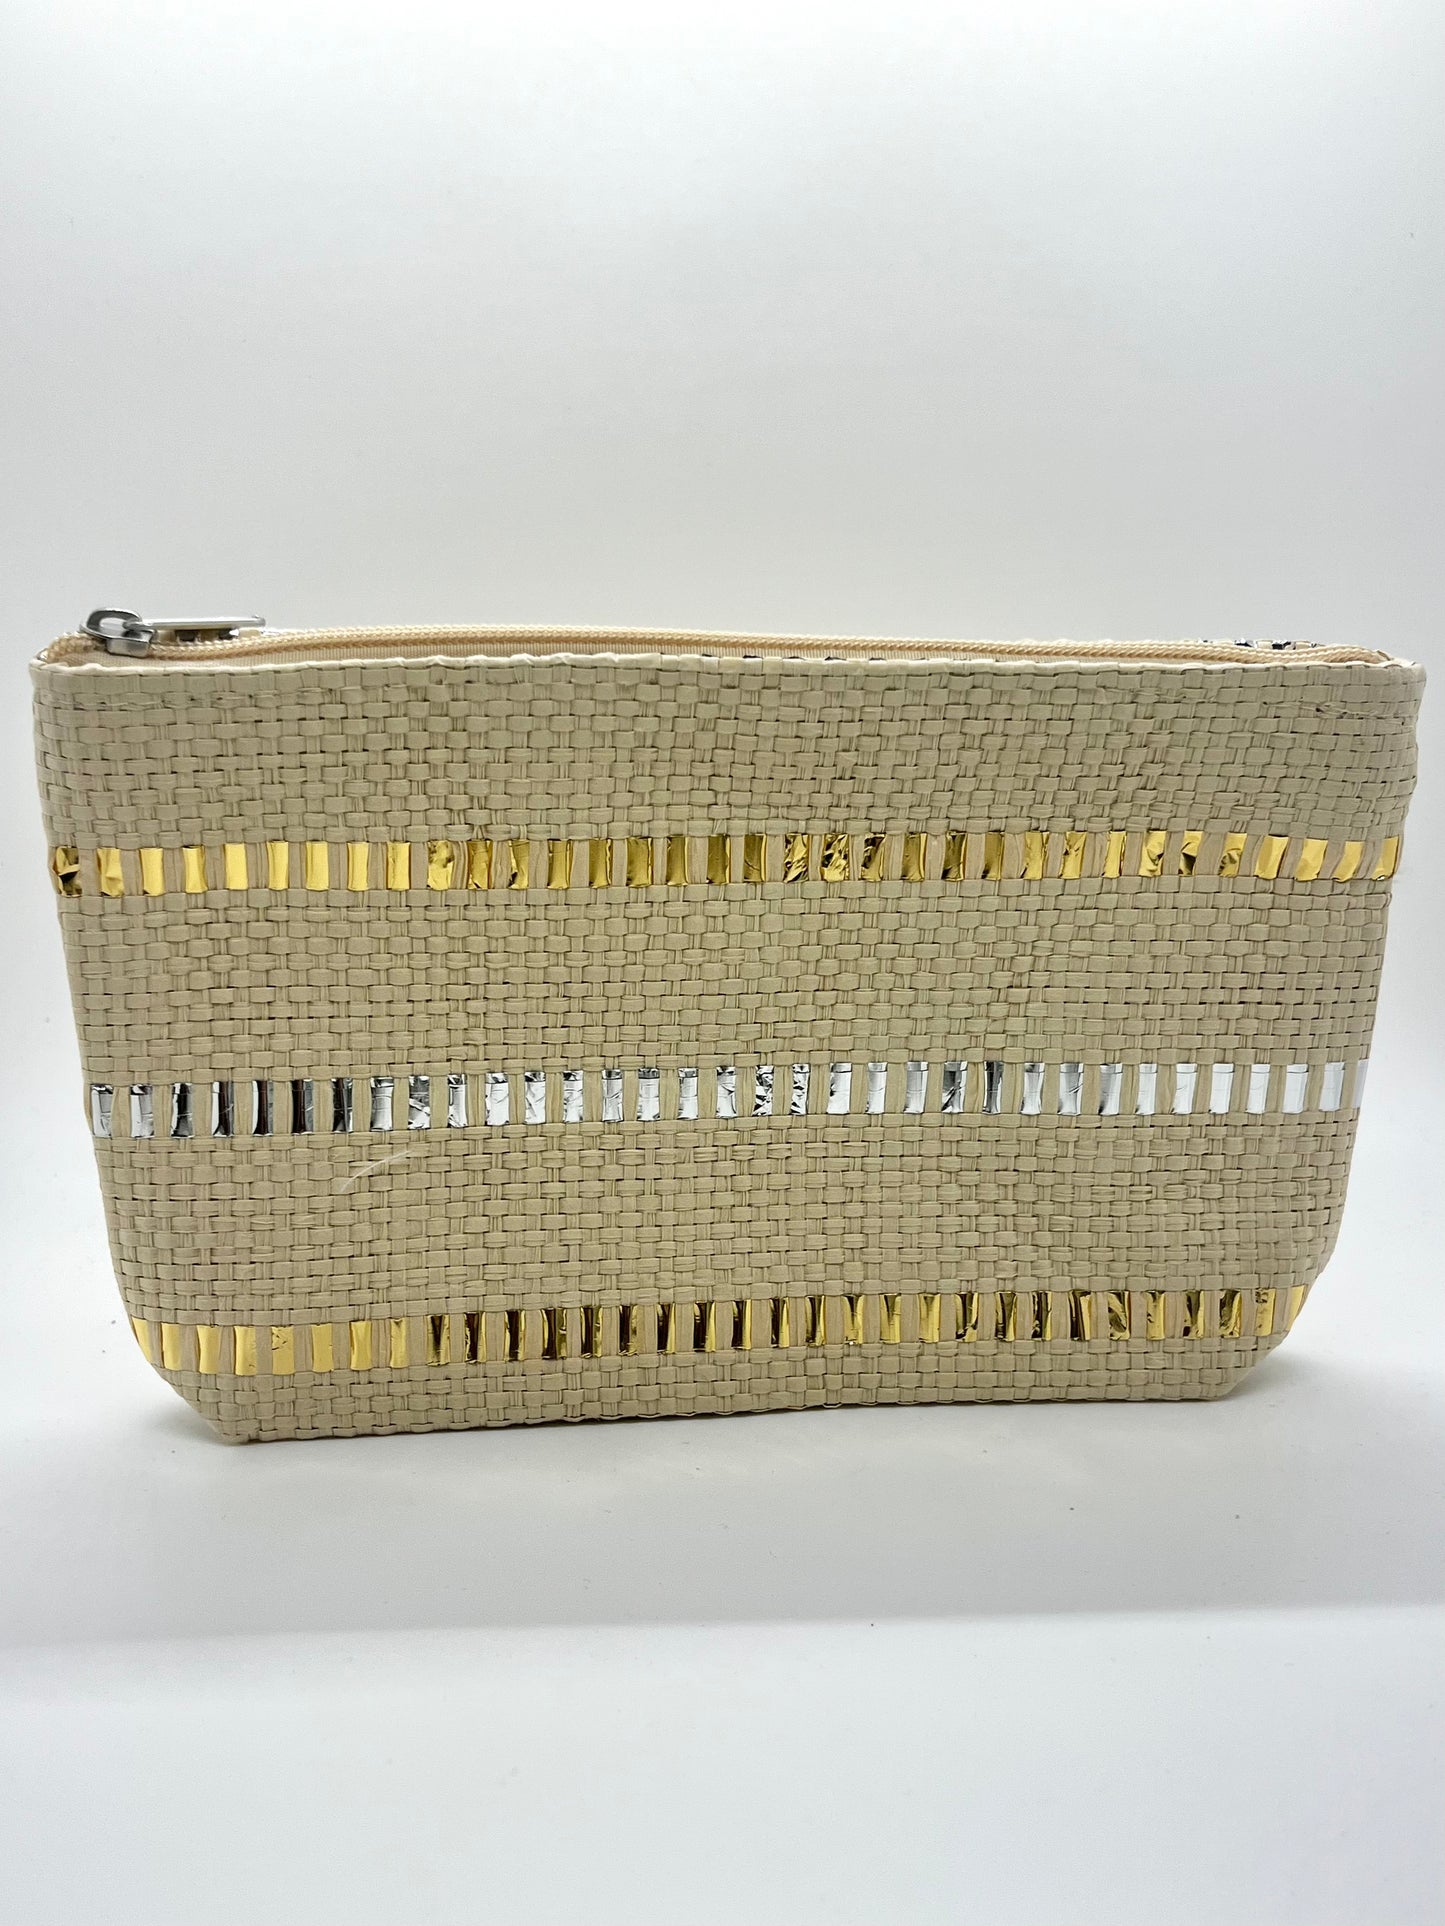 Tweed Bag with Silver and Gold Accents